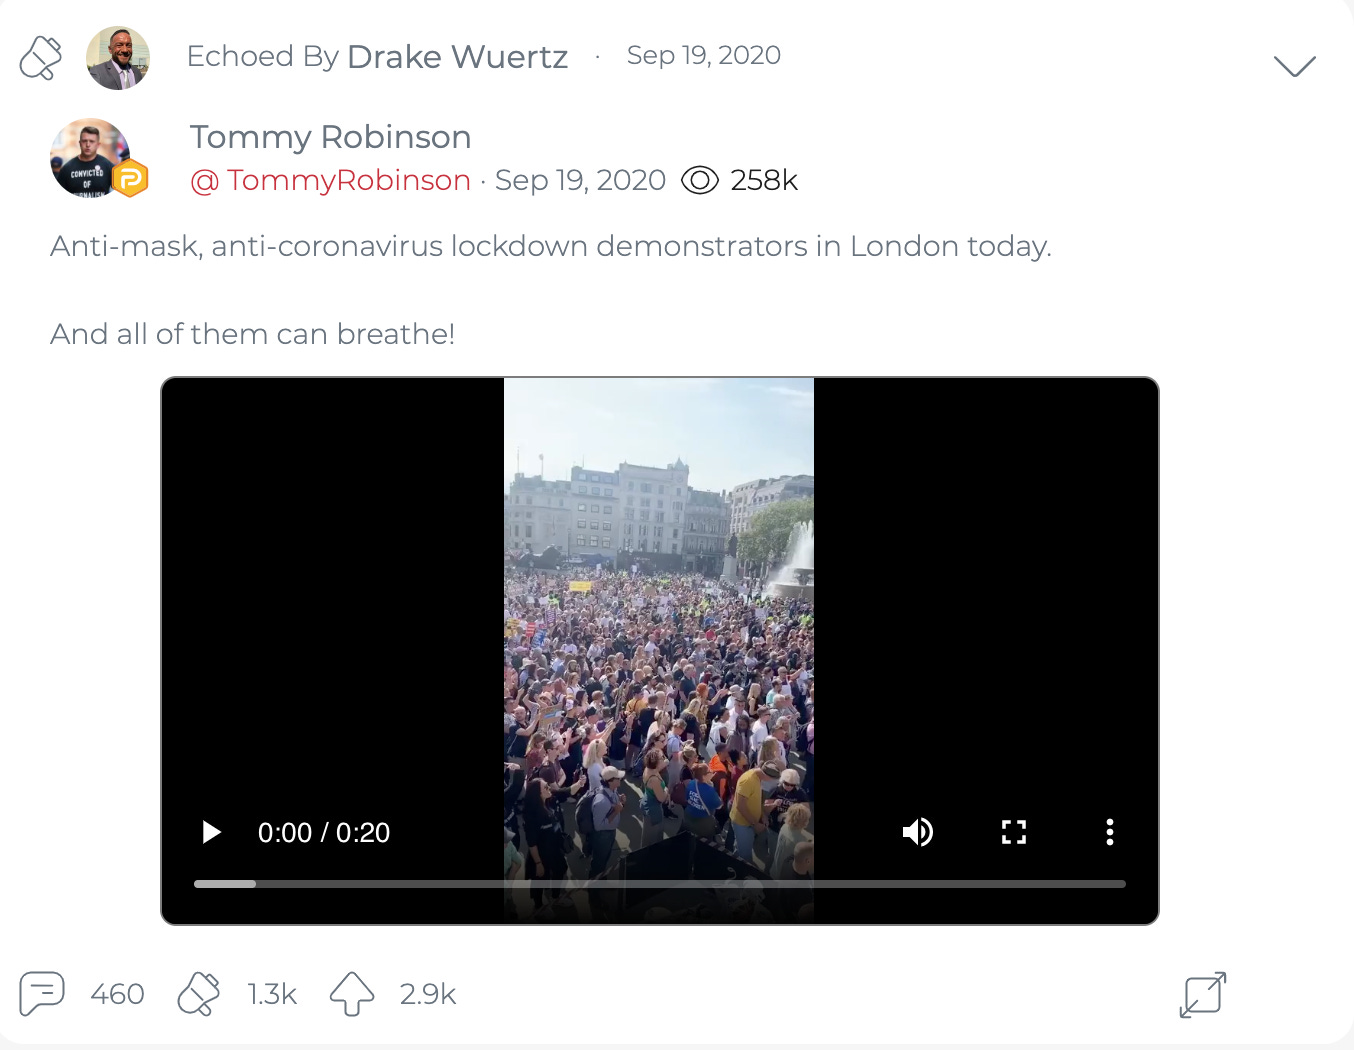 @DrakeWuertzFLA’s first “echo” of Tommy Robinson, sharing a September 19, 2020 post about a video of an anti-mask rally in London. (Image: Parler screenshot)